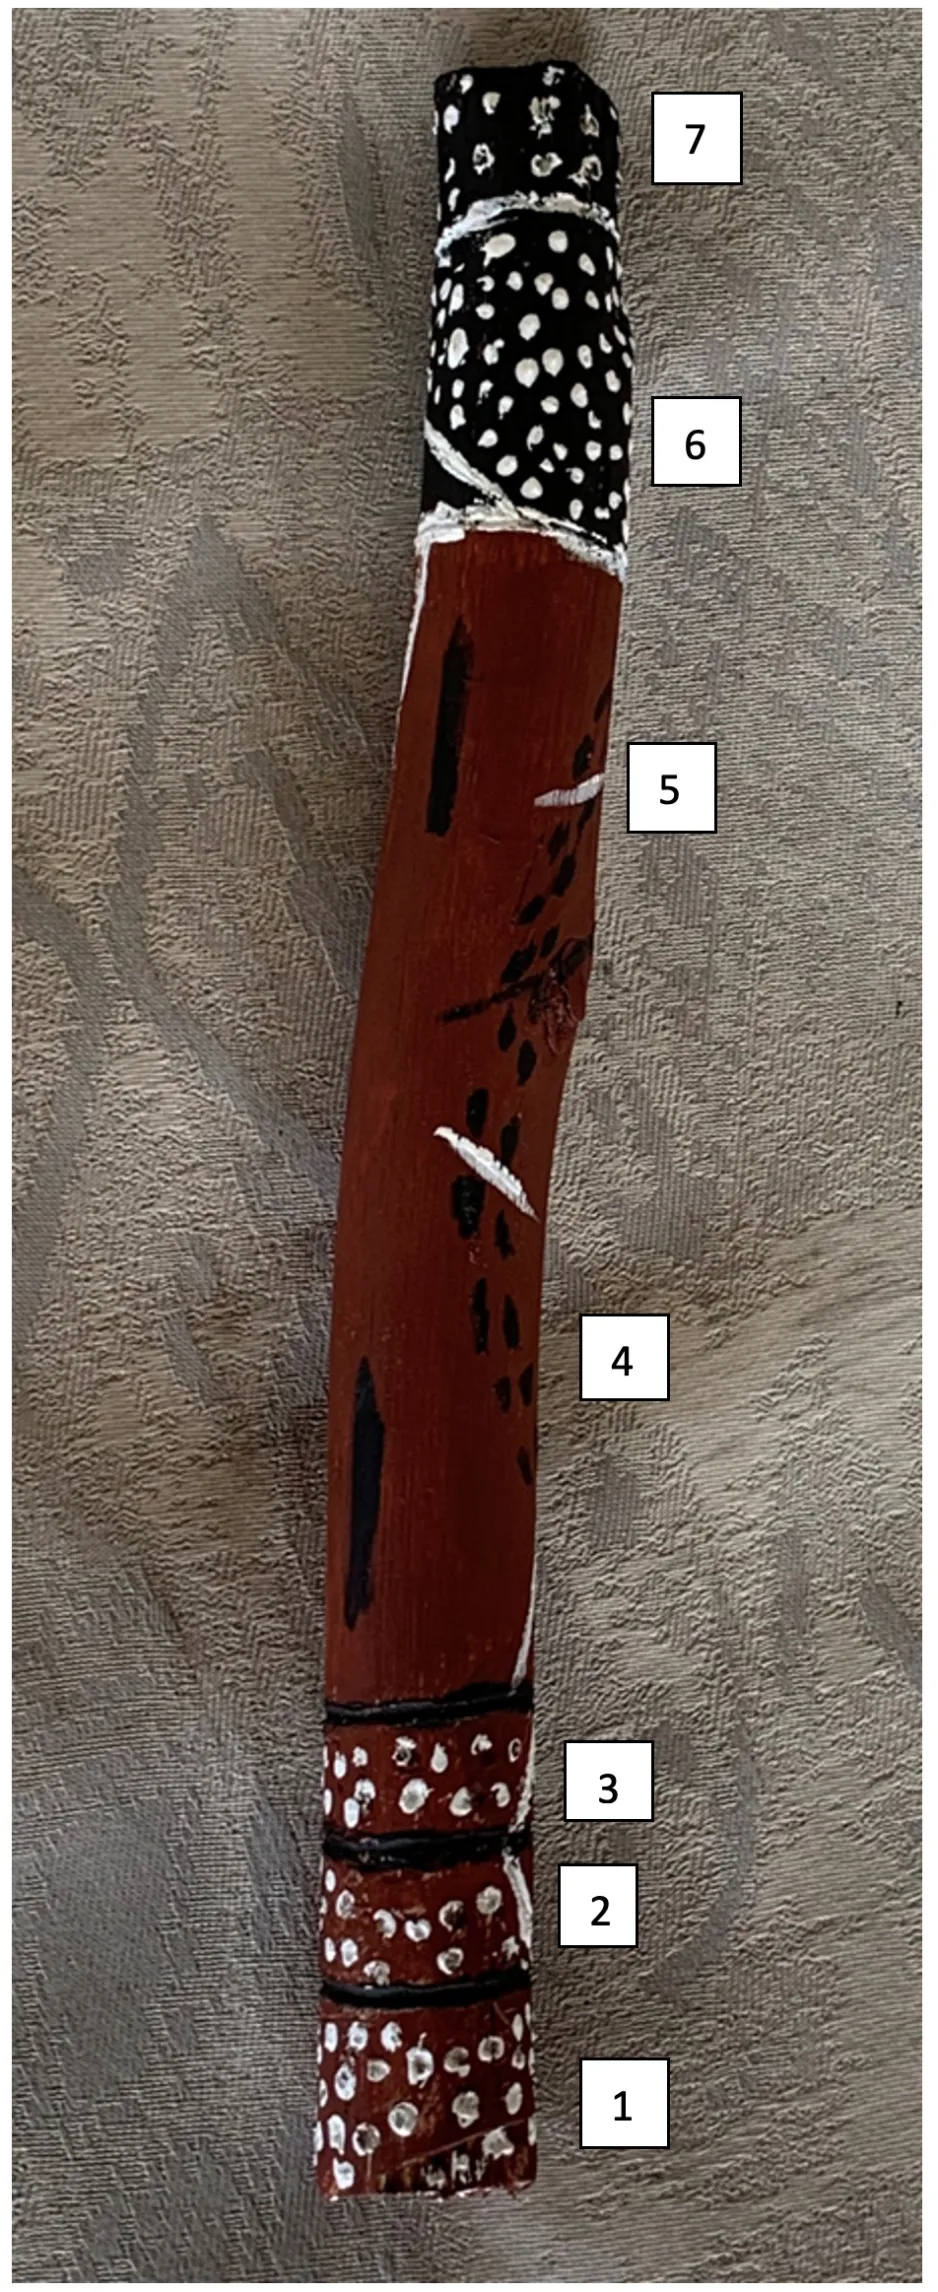 Stick used for cultural purposes painted with brown, white, and black markings.